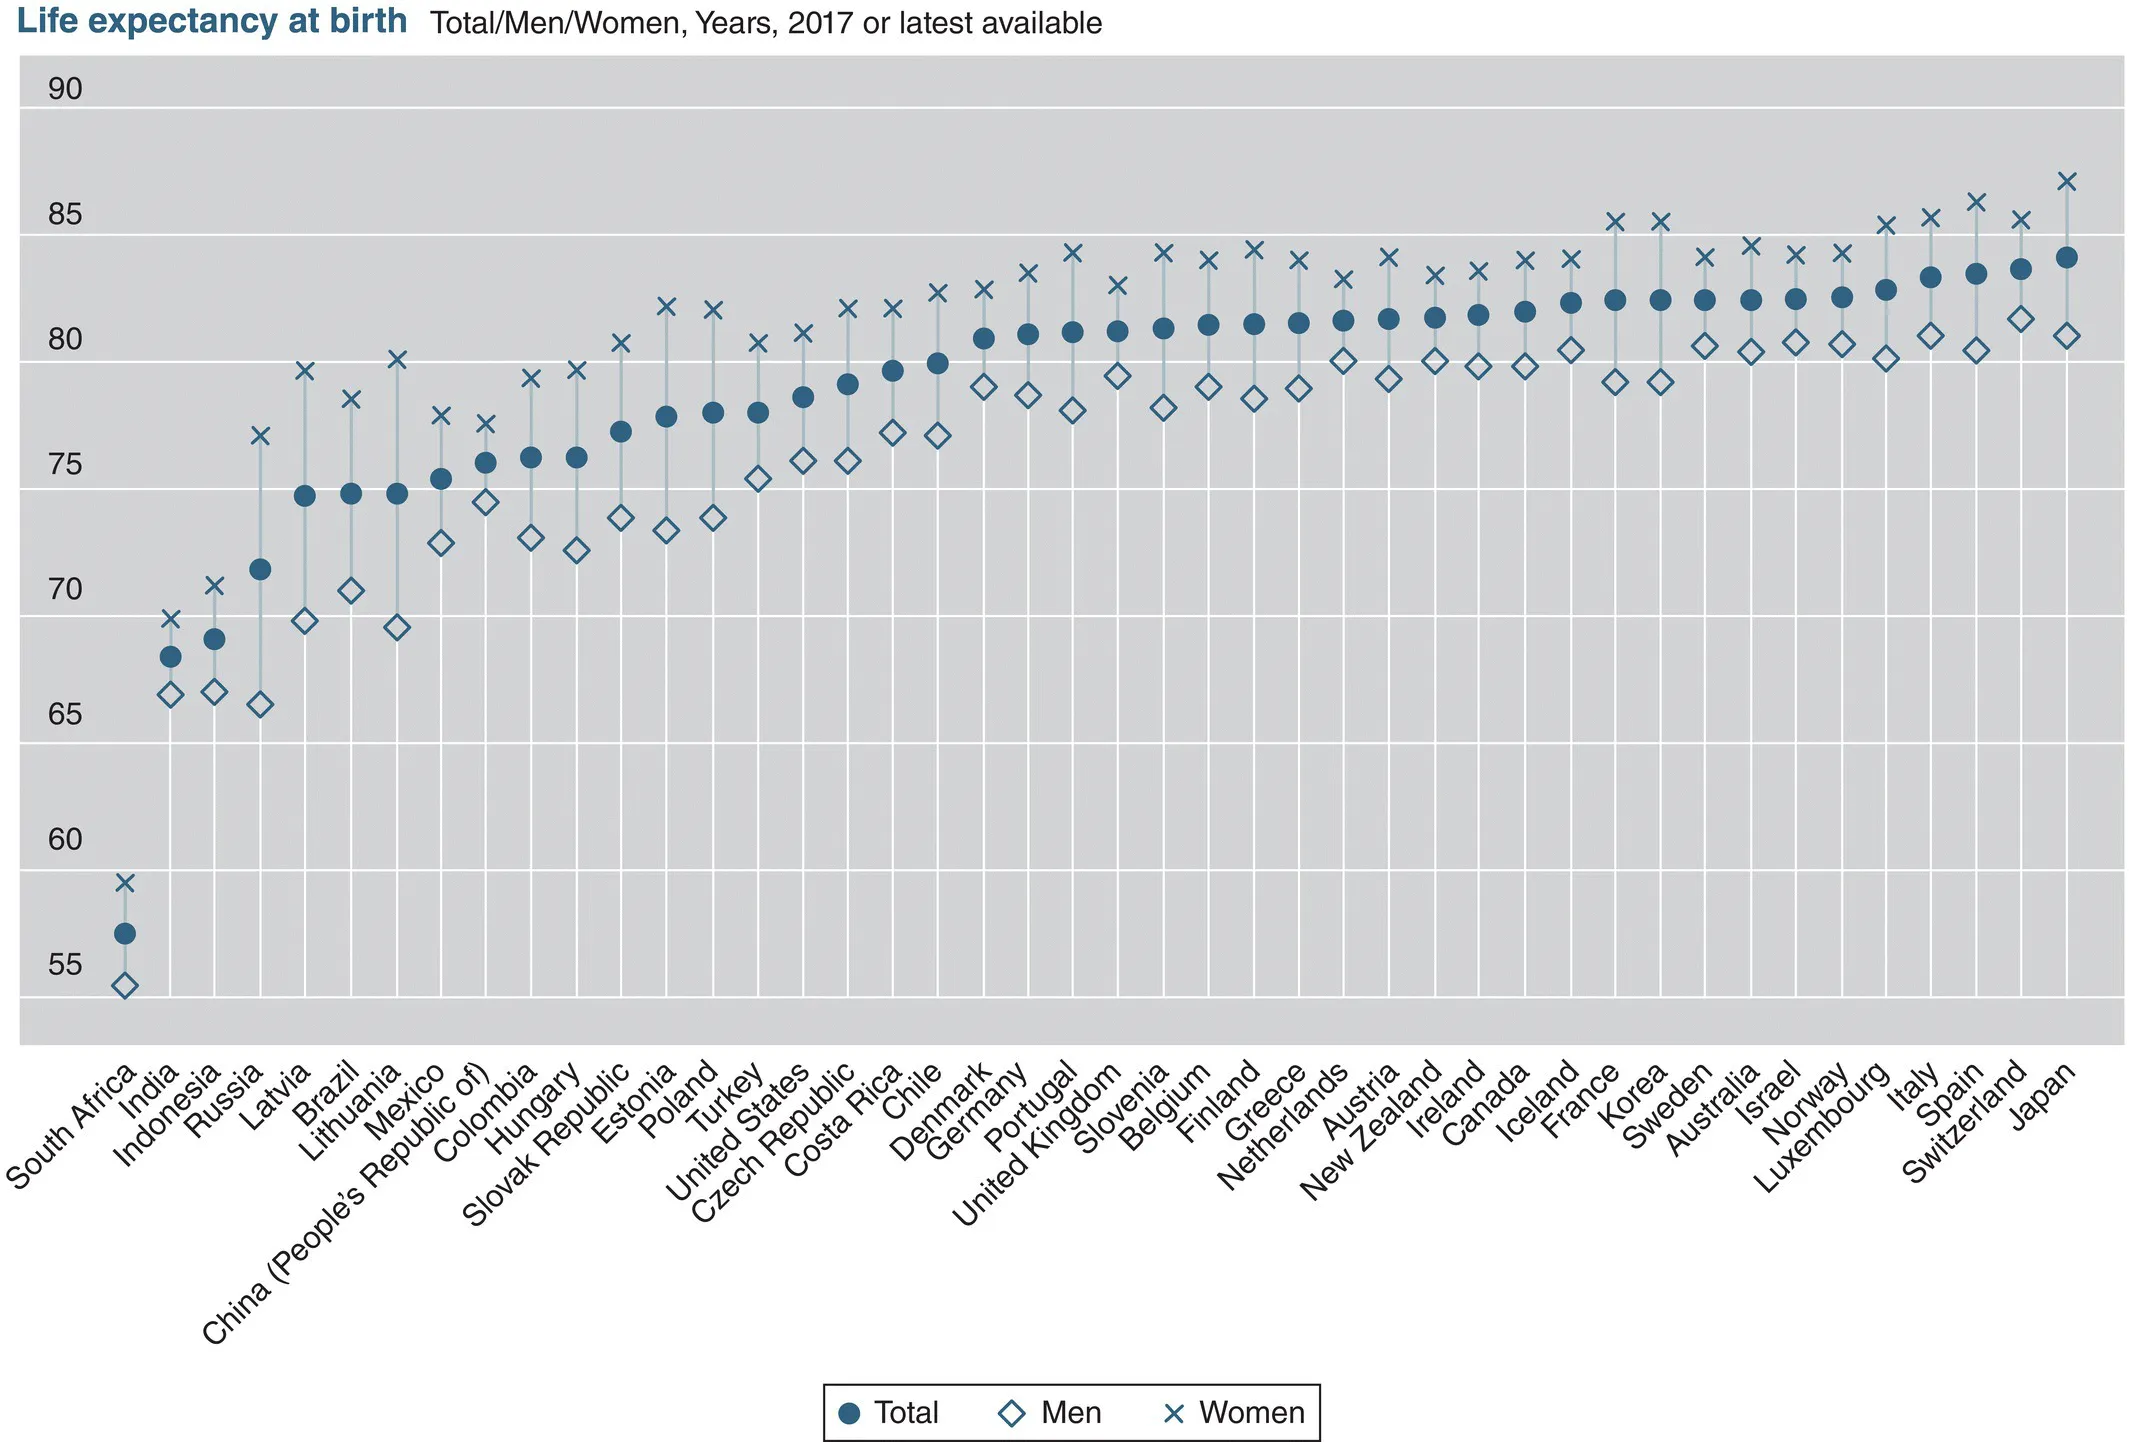 Graph depicts the life expectancy at birth for OECD countries.